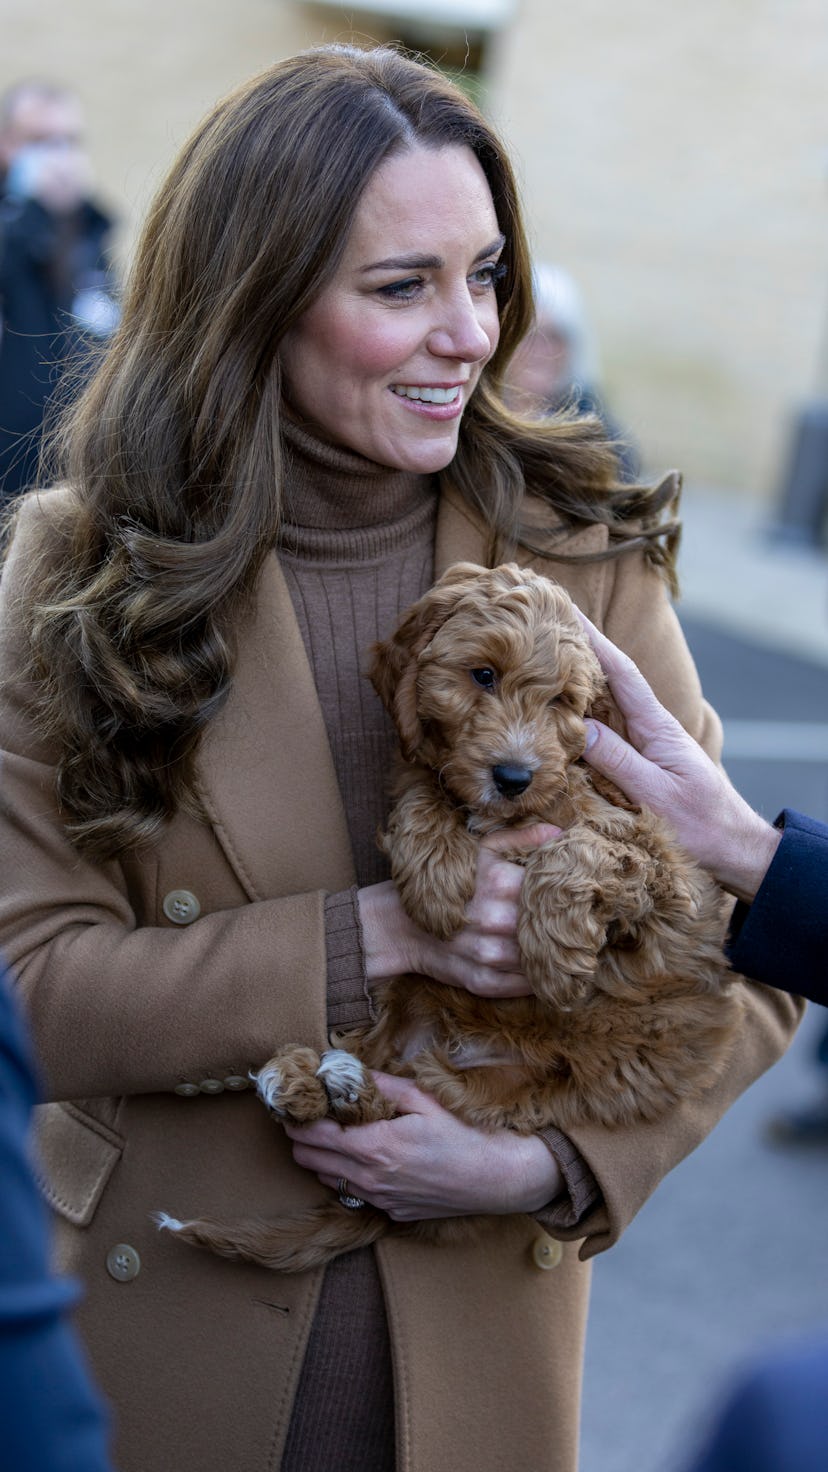 New photos of Kate Middleton holding a therapy puppy on Jan. 20 are adorable.